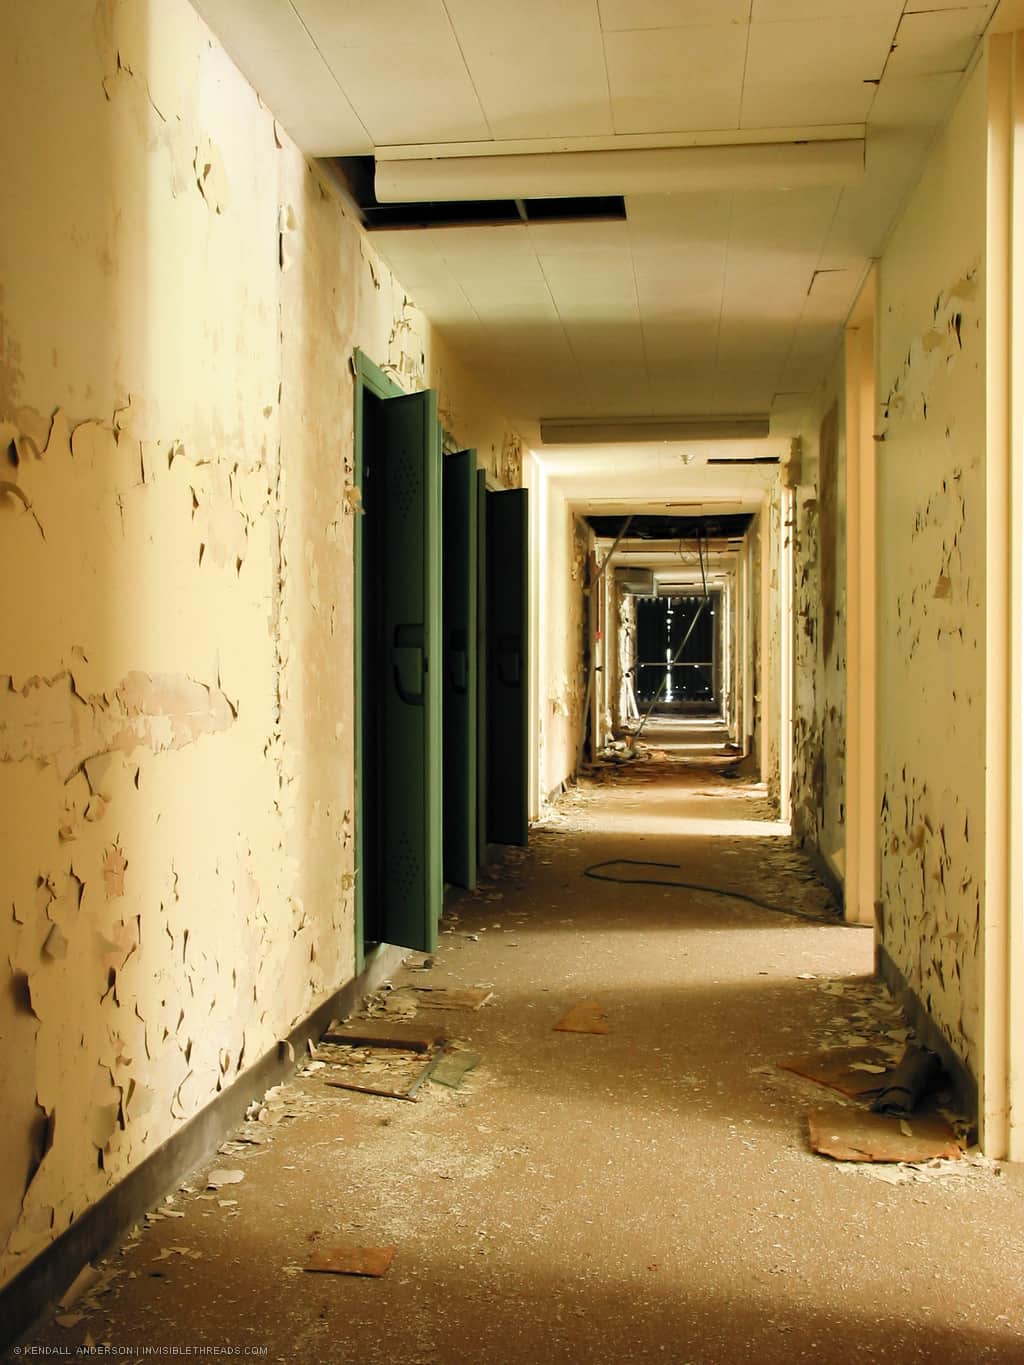 A carpeted hallway with yellow walls and some green lockers is covered with peeling paint and general debris.